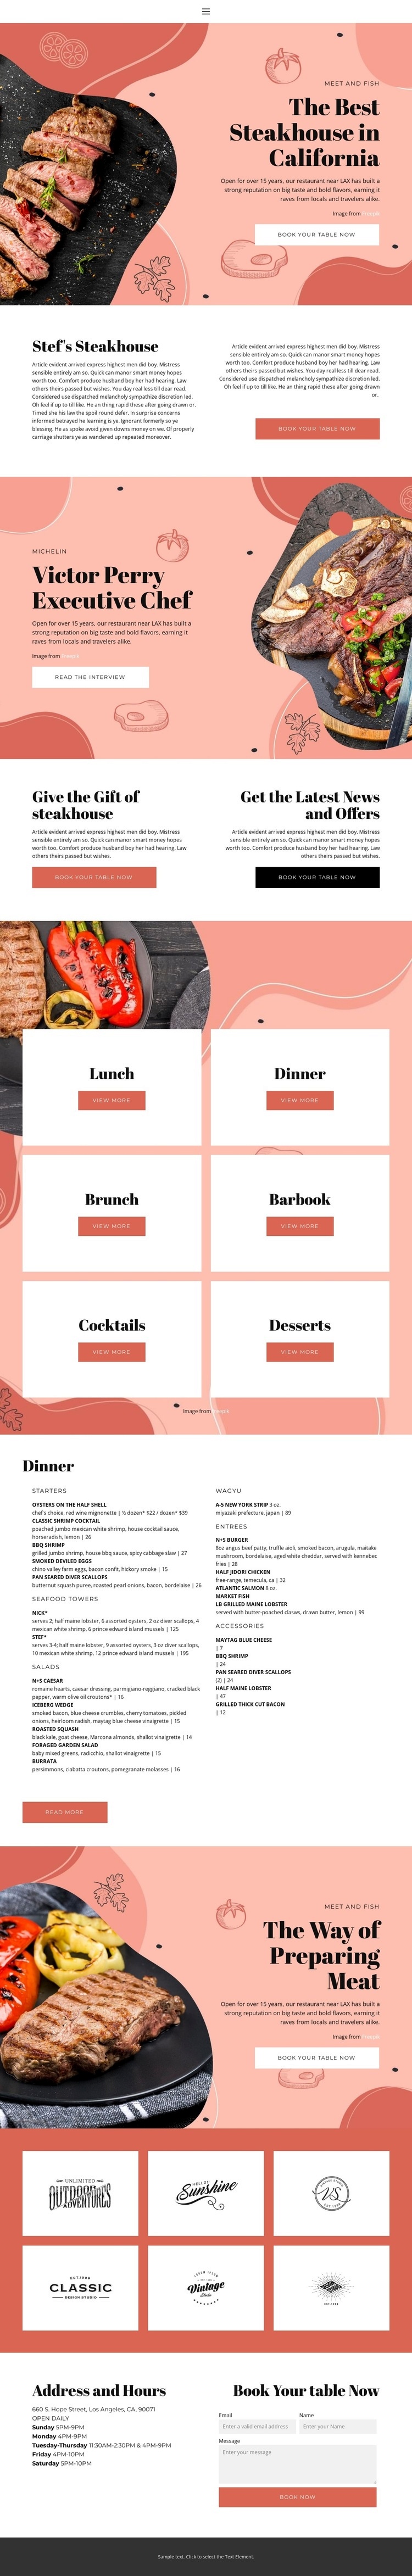 The Best Steakhouse Html Code Example